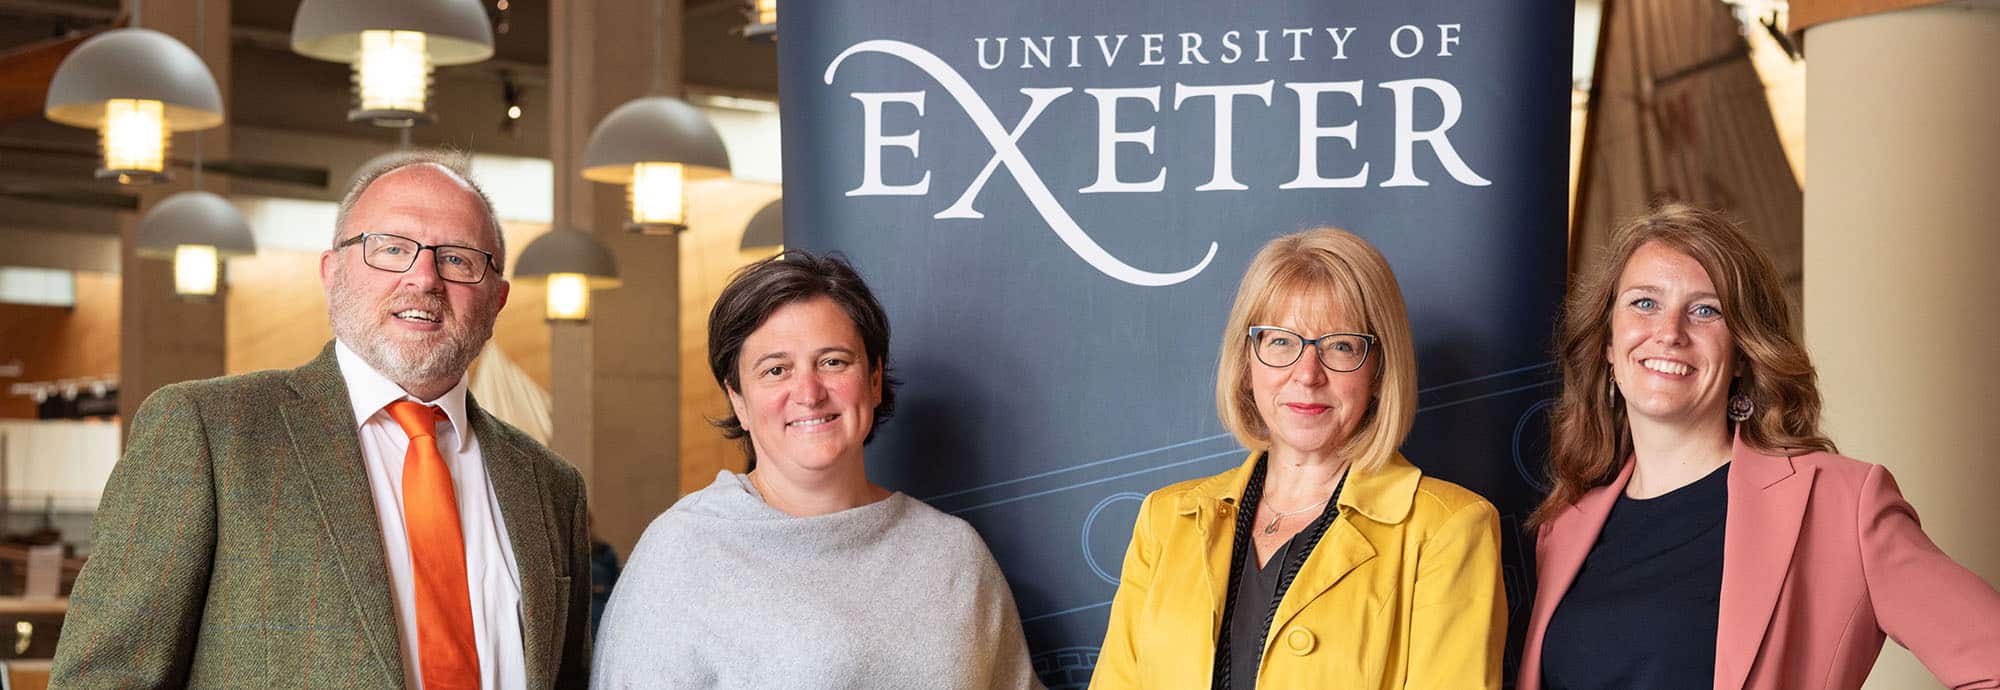 Three women and one man line up for a photo in front of a 'University of Exeter' banner.